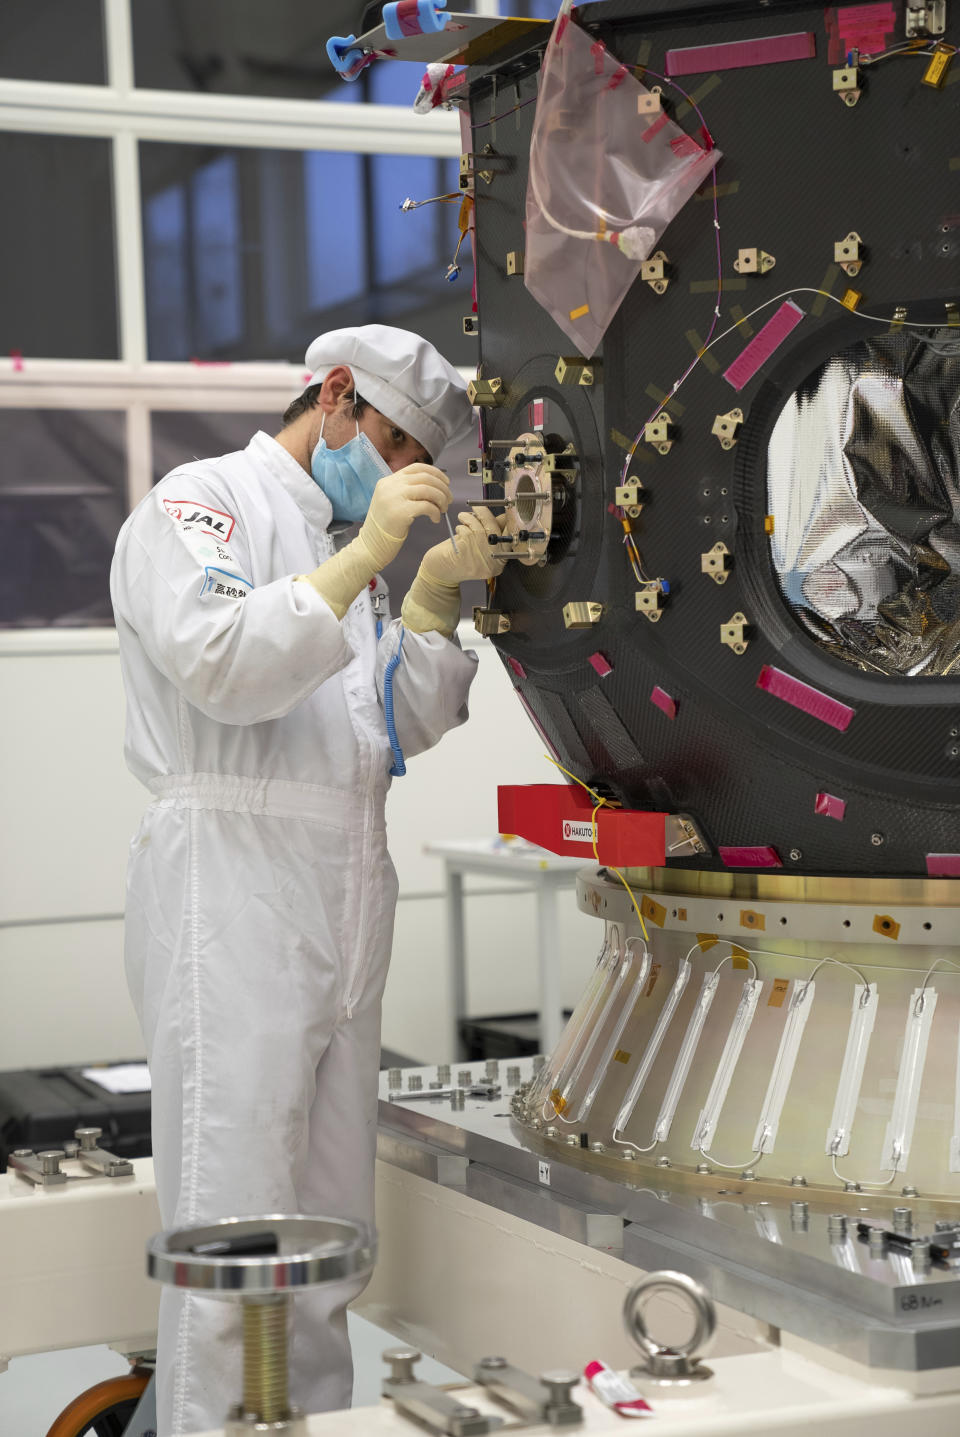 In this photo provided by ispace in April 2023, a technician works on the Hakuto spacecraft in Japan. On Tuesday, April 25, 2023, flight controllers plan to direct the craft to descend from orbit and land on the moon's surface. (ispace via AP)